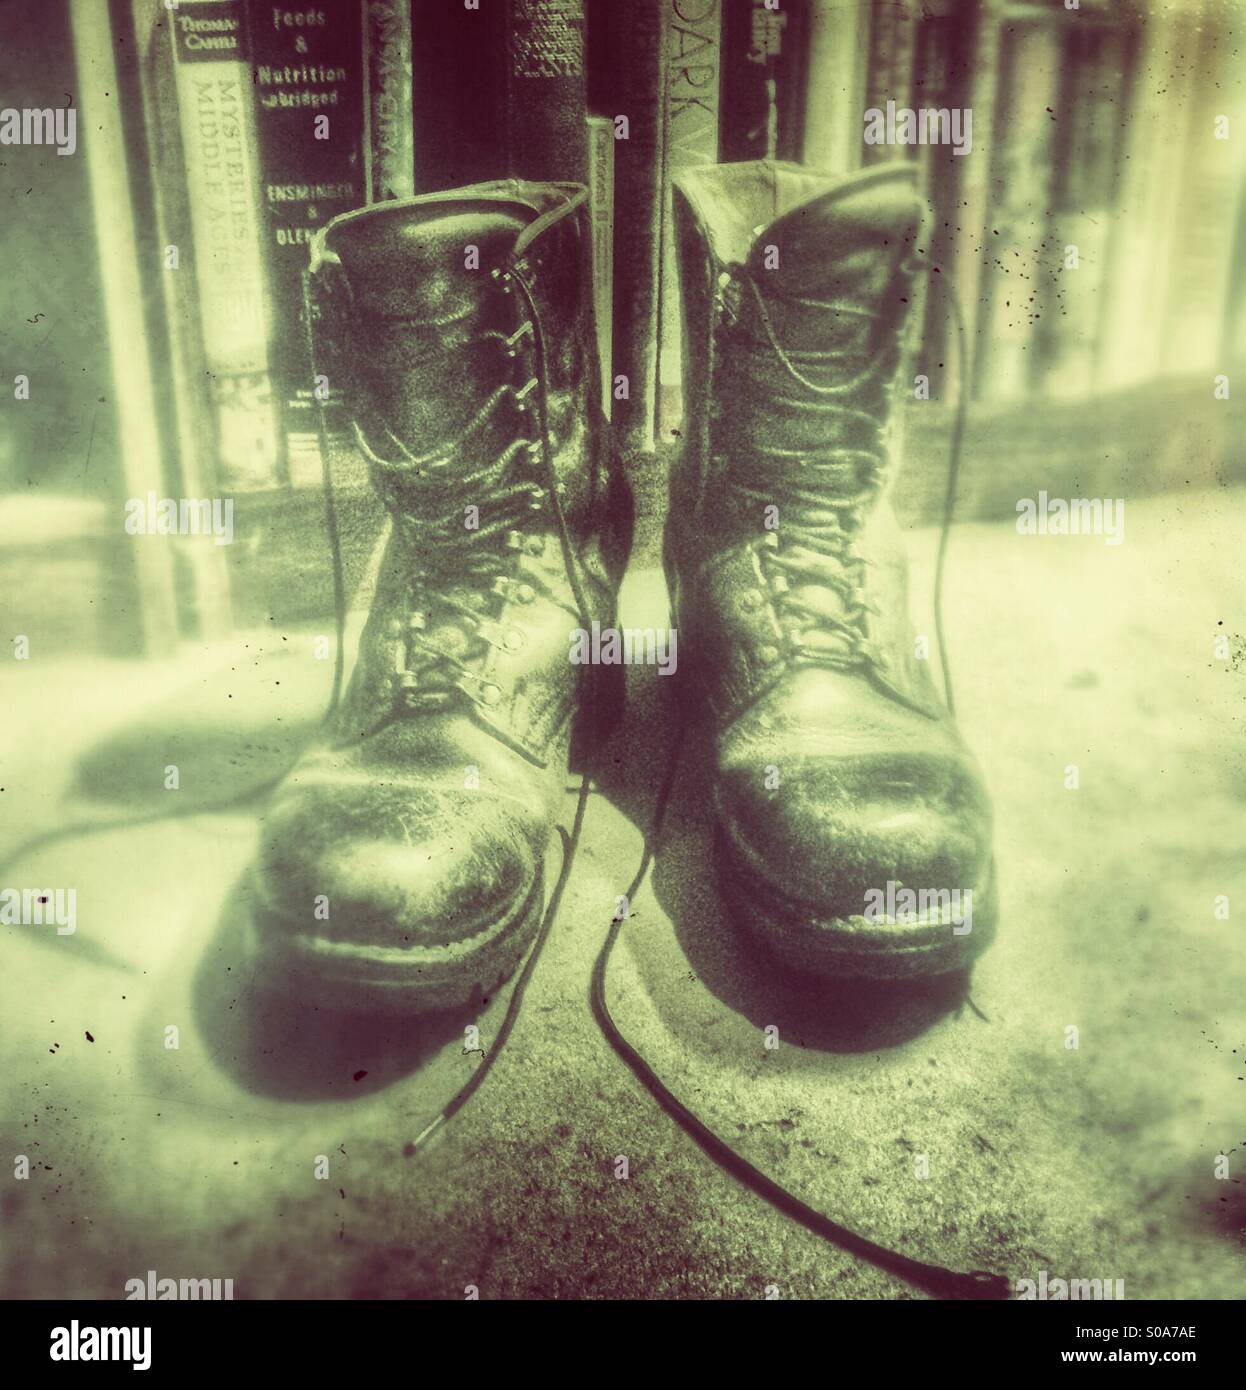 Old work boots Stock Photo - Alamy